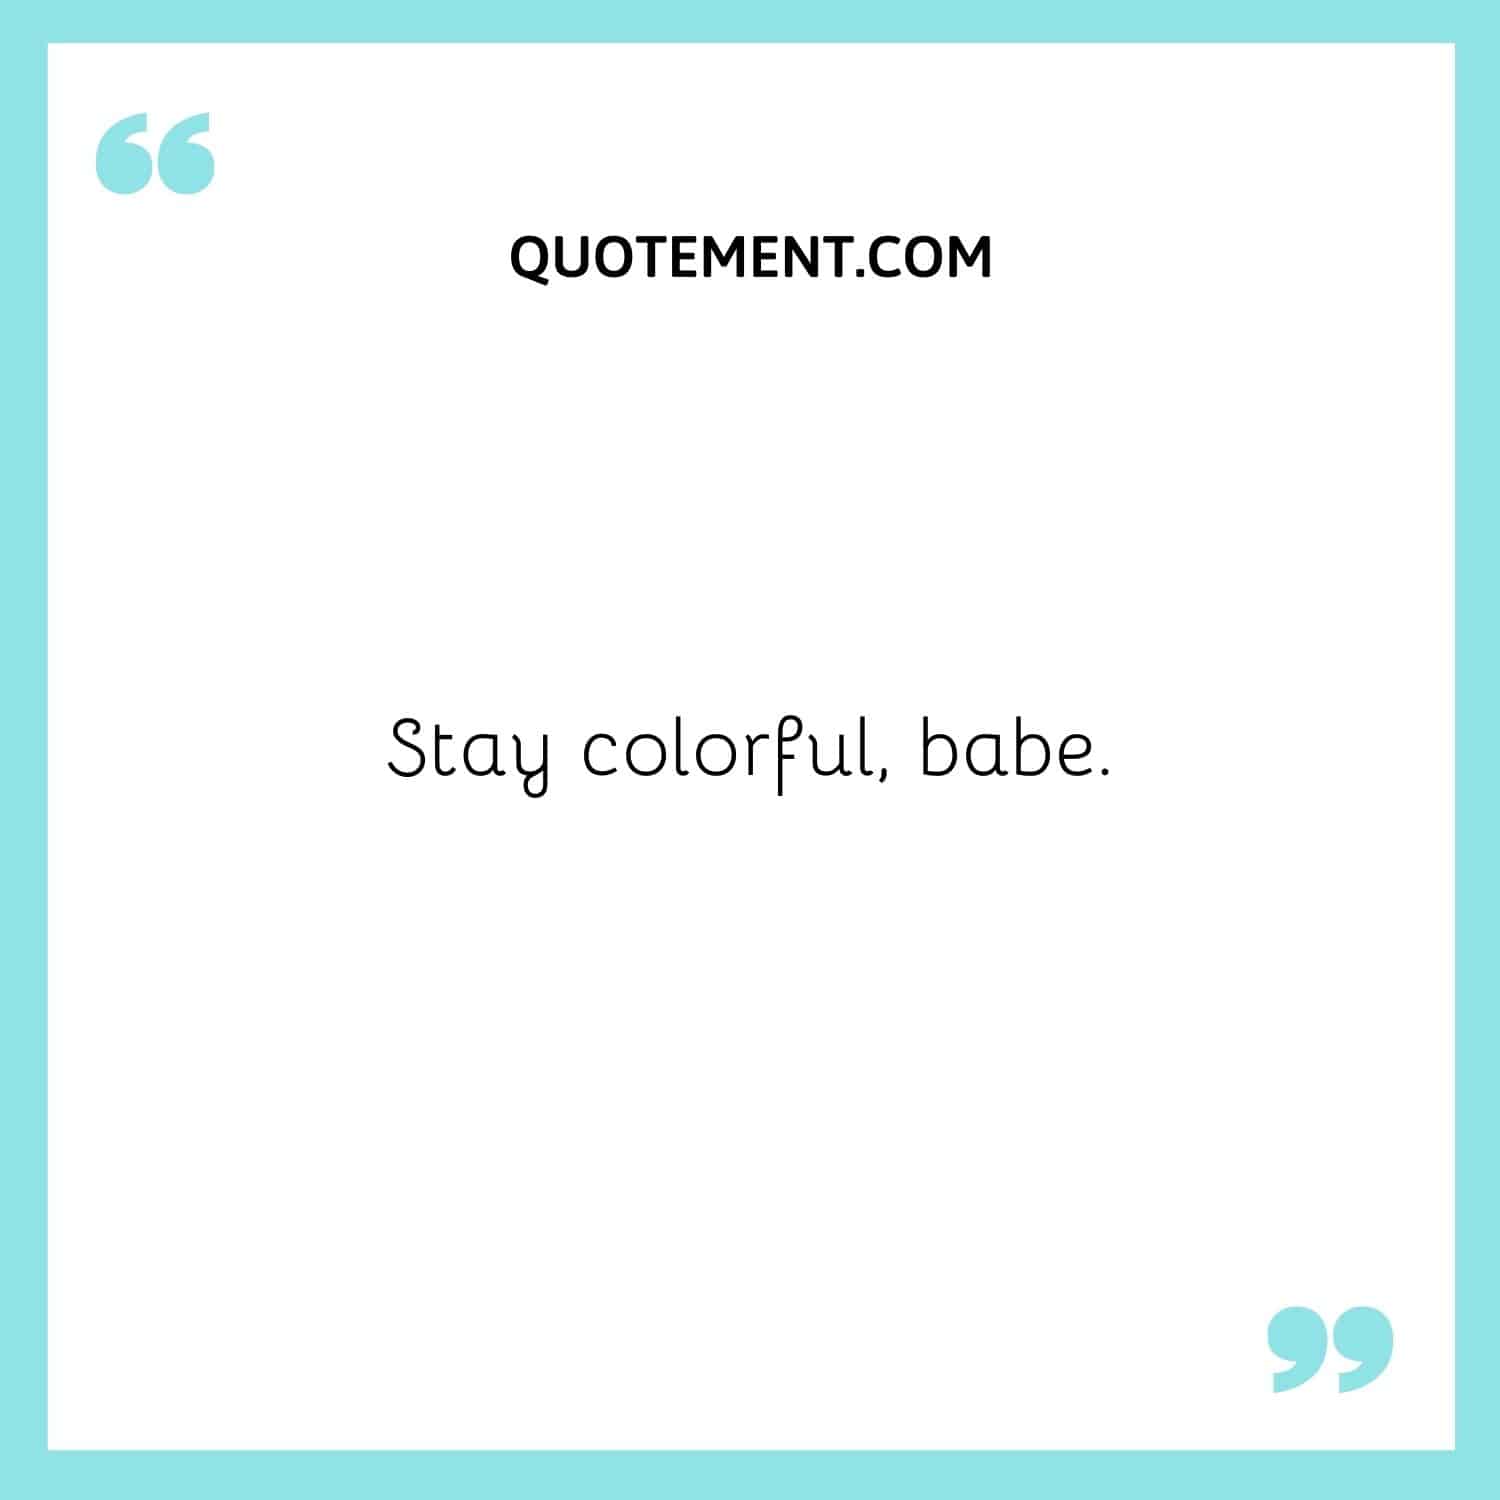 Stay colorful, babe